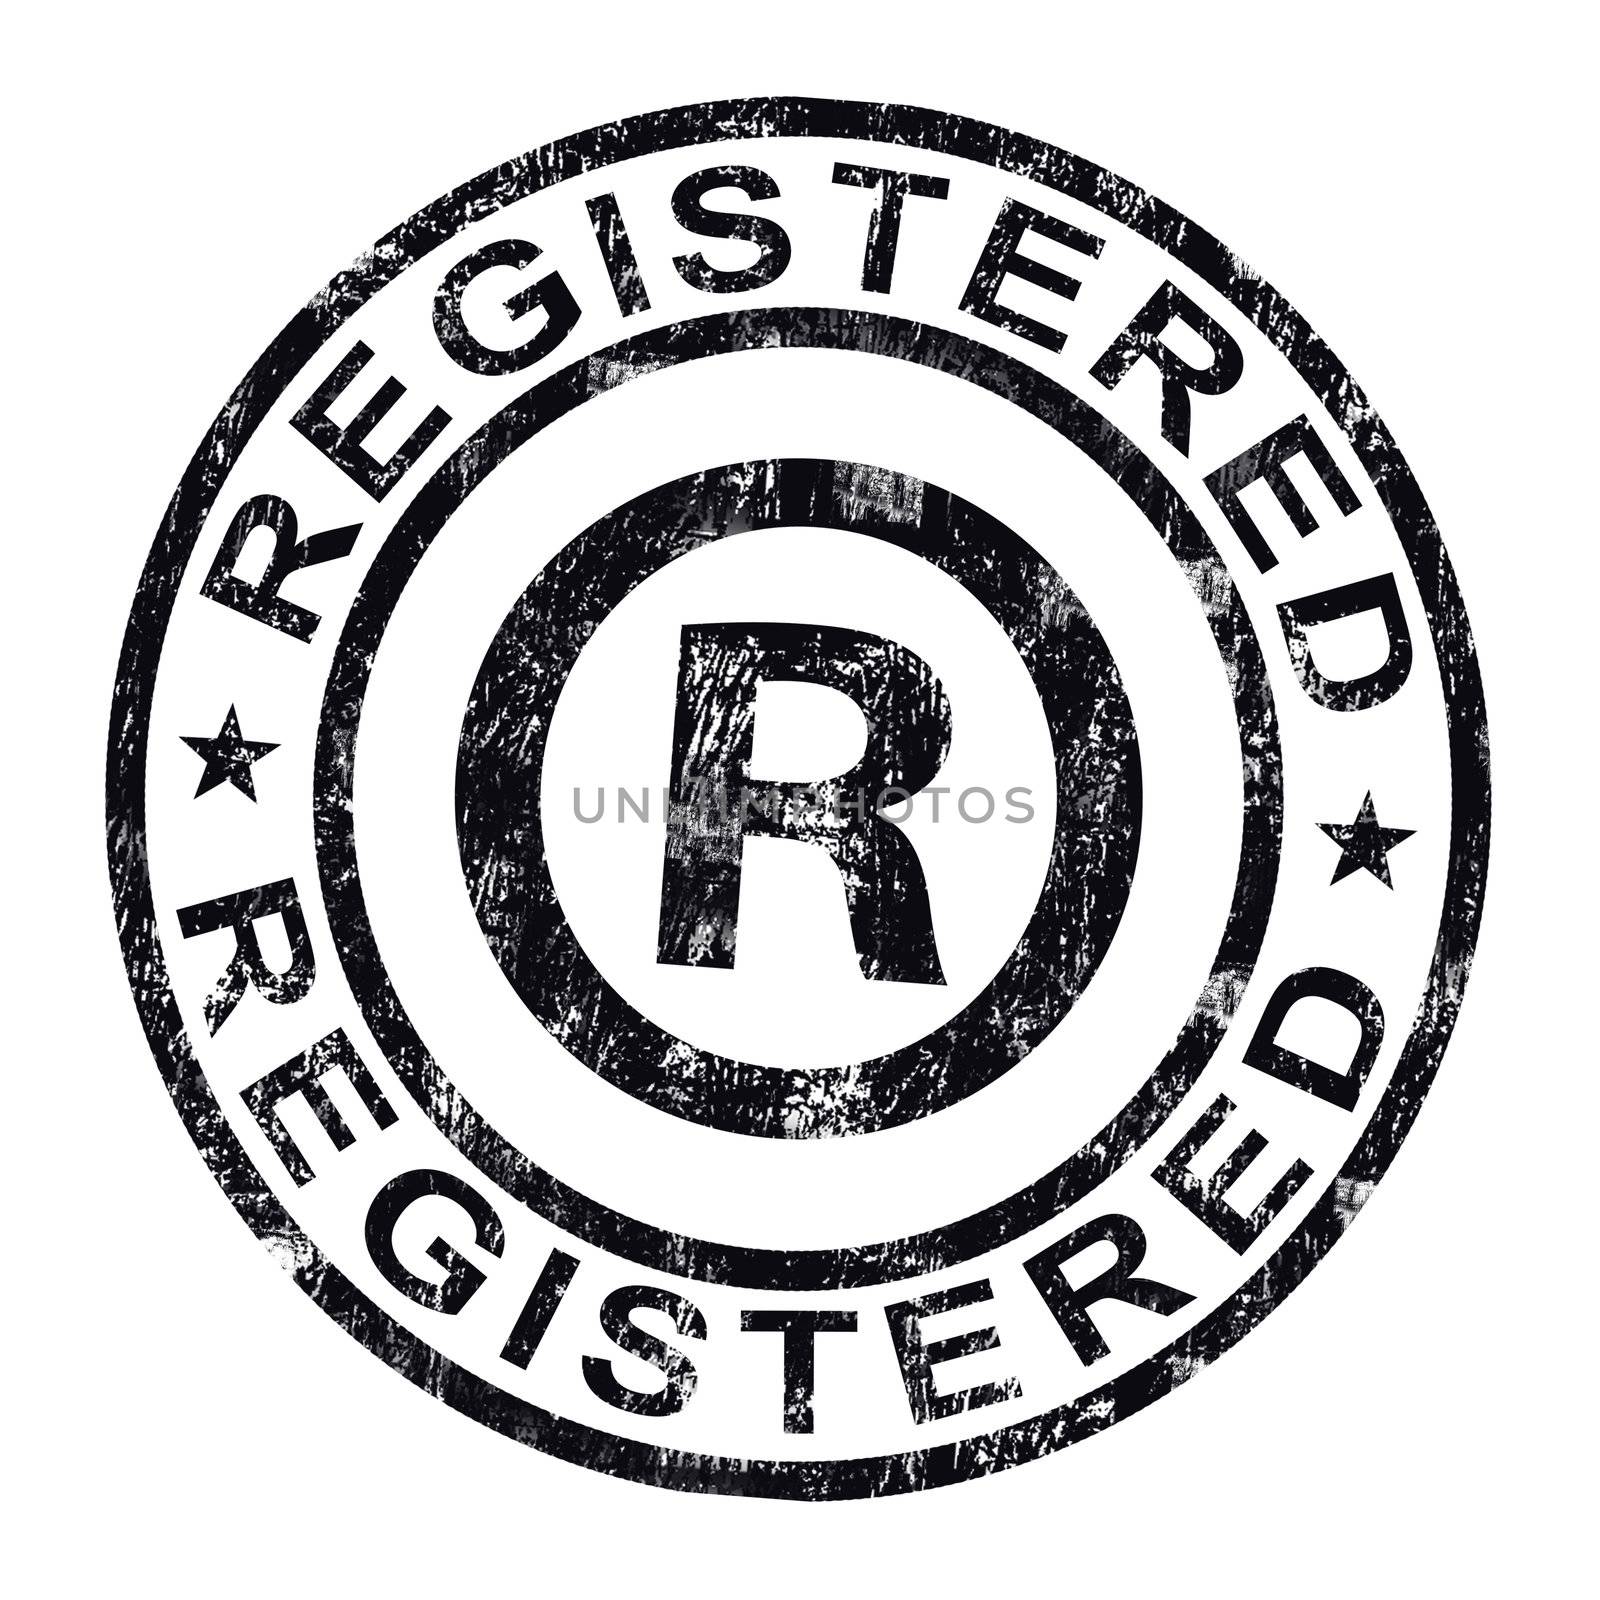 Registered Stamp Shows Copyright Or Trademark by stuartmiles